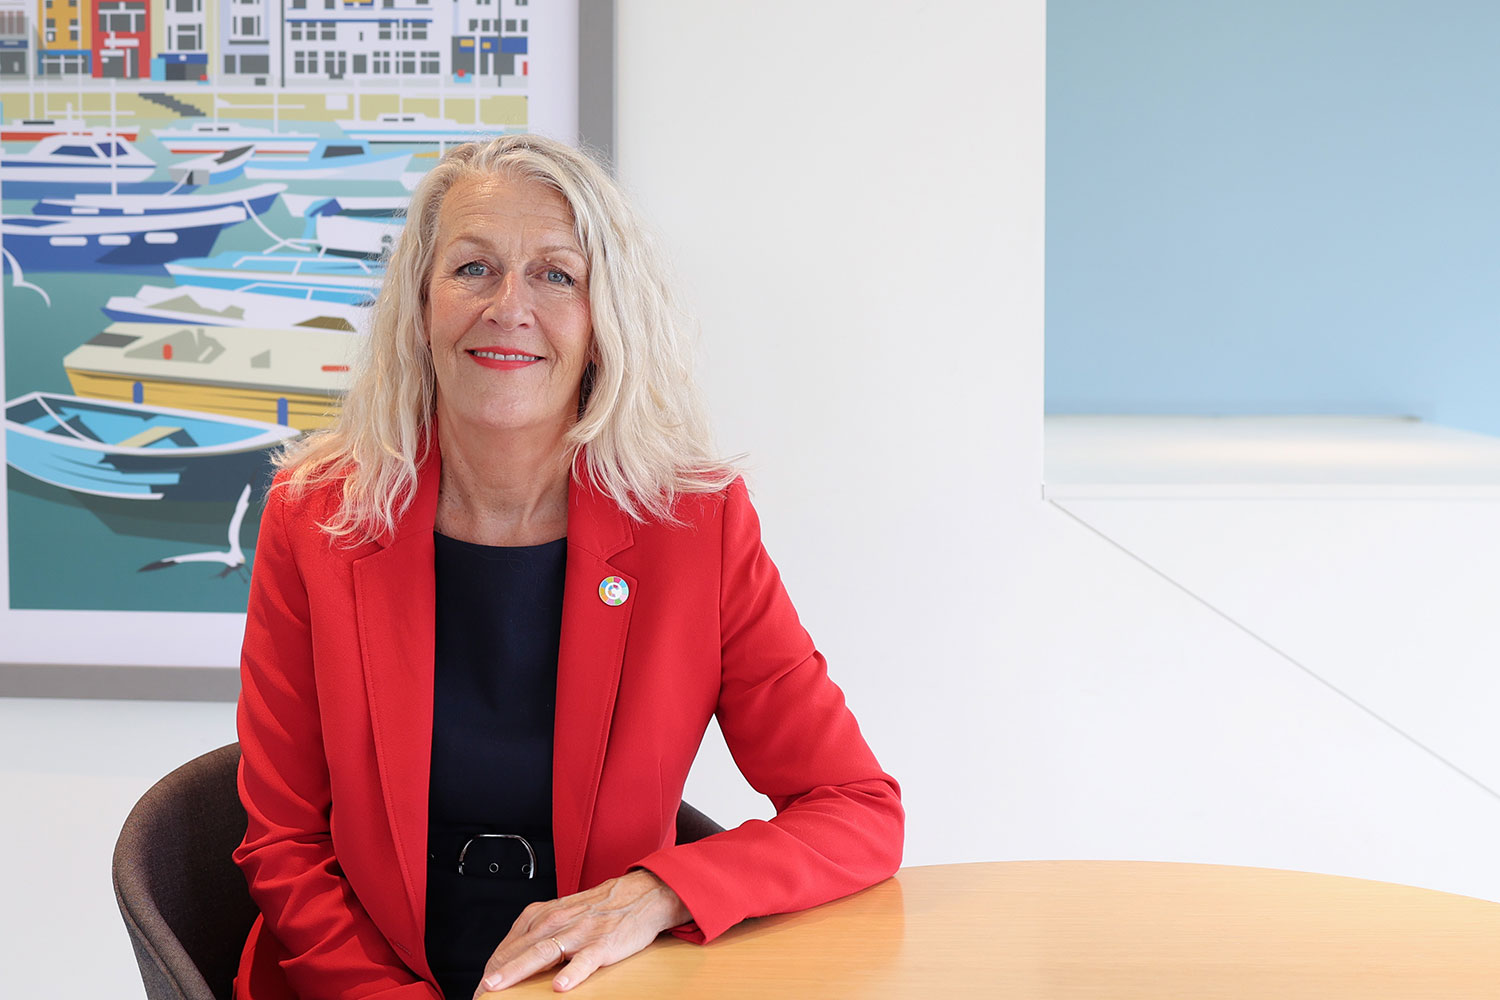 LGA Chair Cllr Louise Gittins sat at a circular office desk and smiling. Louise is wearing a vibrant red suit jacket over a black dress.